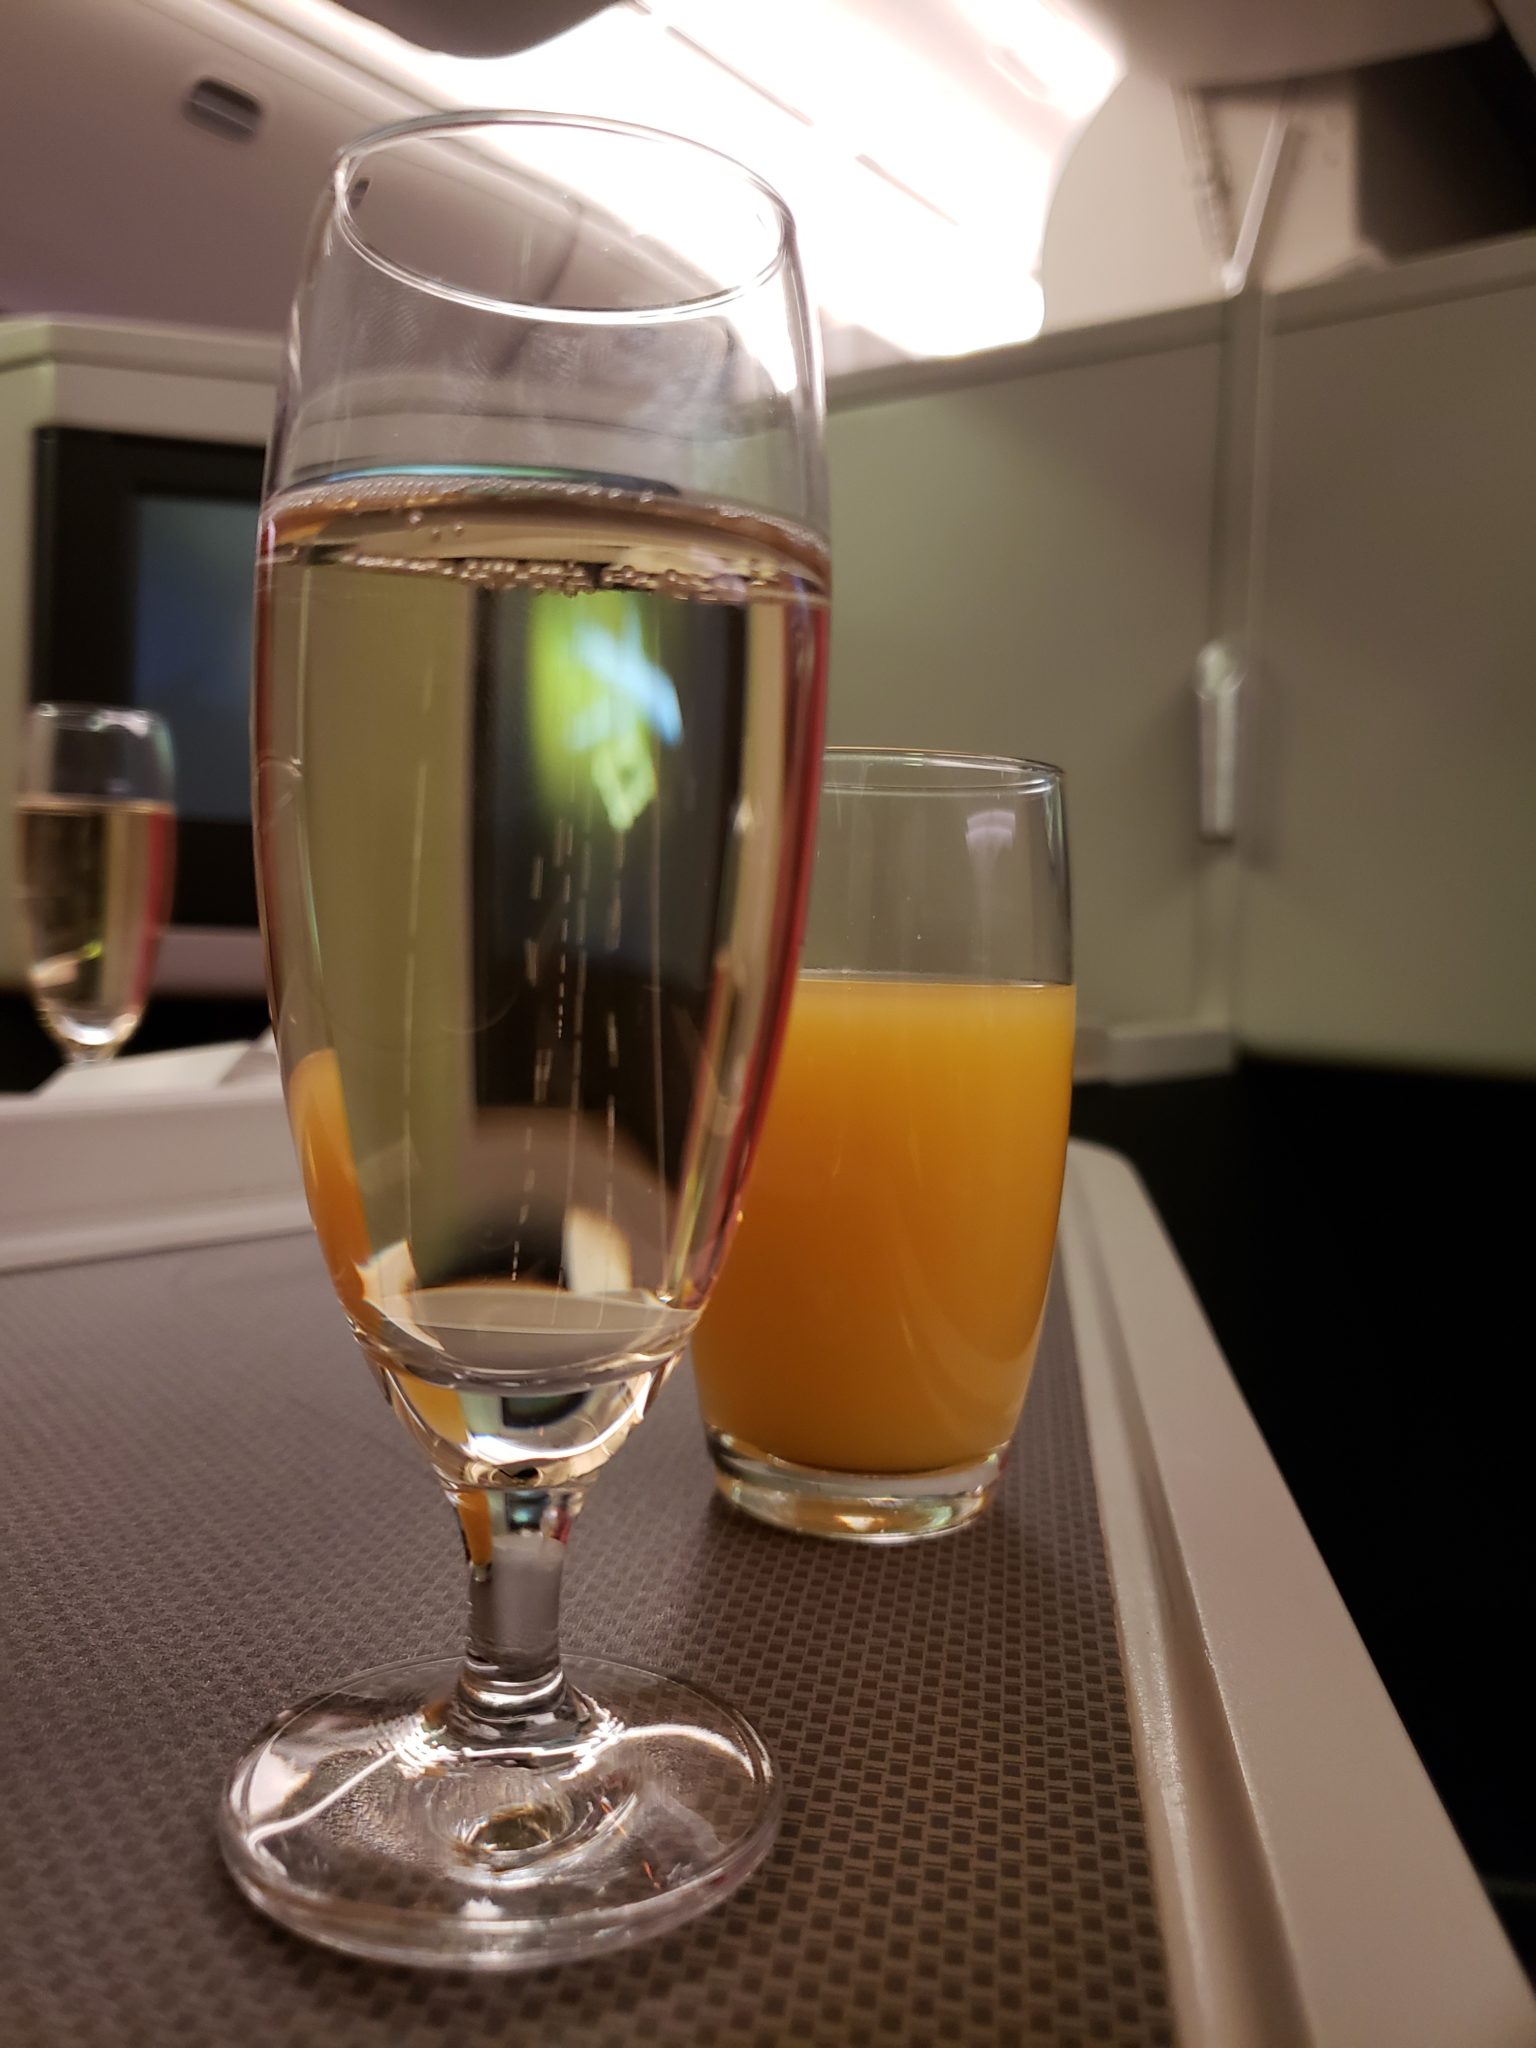 a glass of champagne next to a glass of orange juice